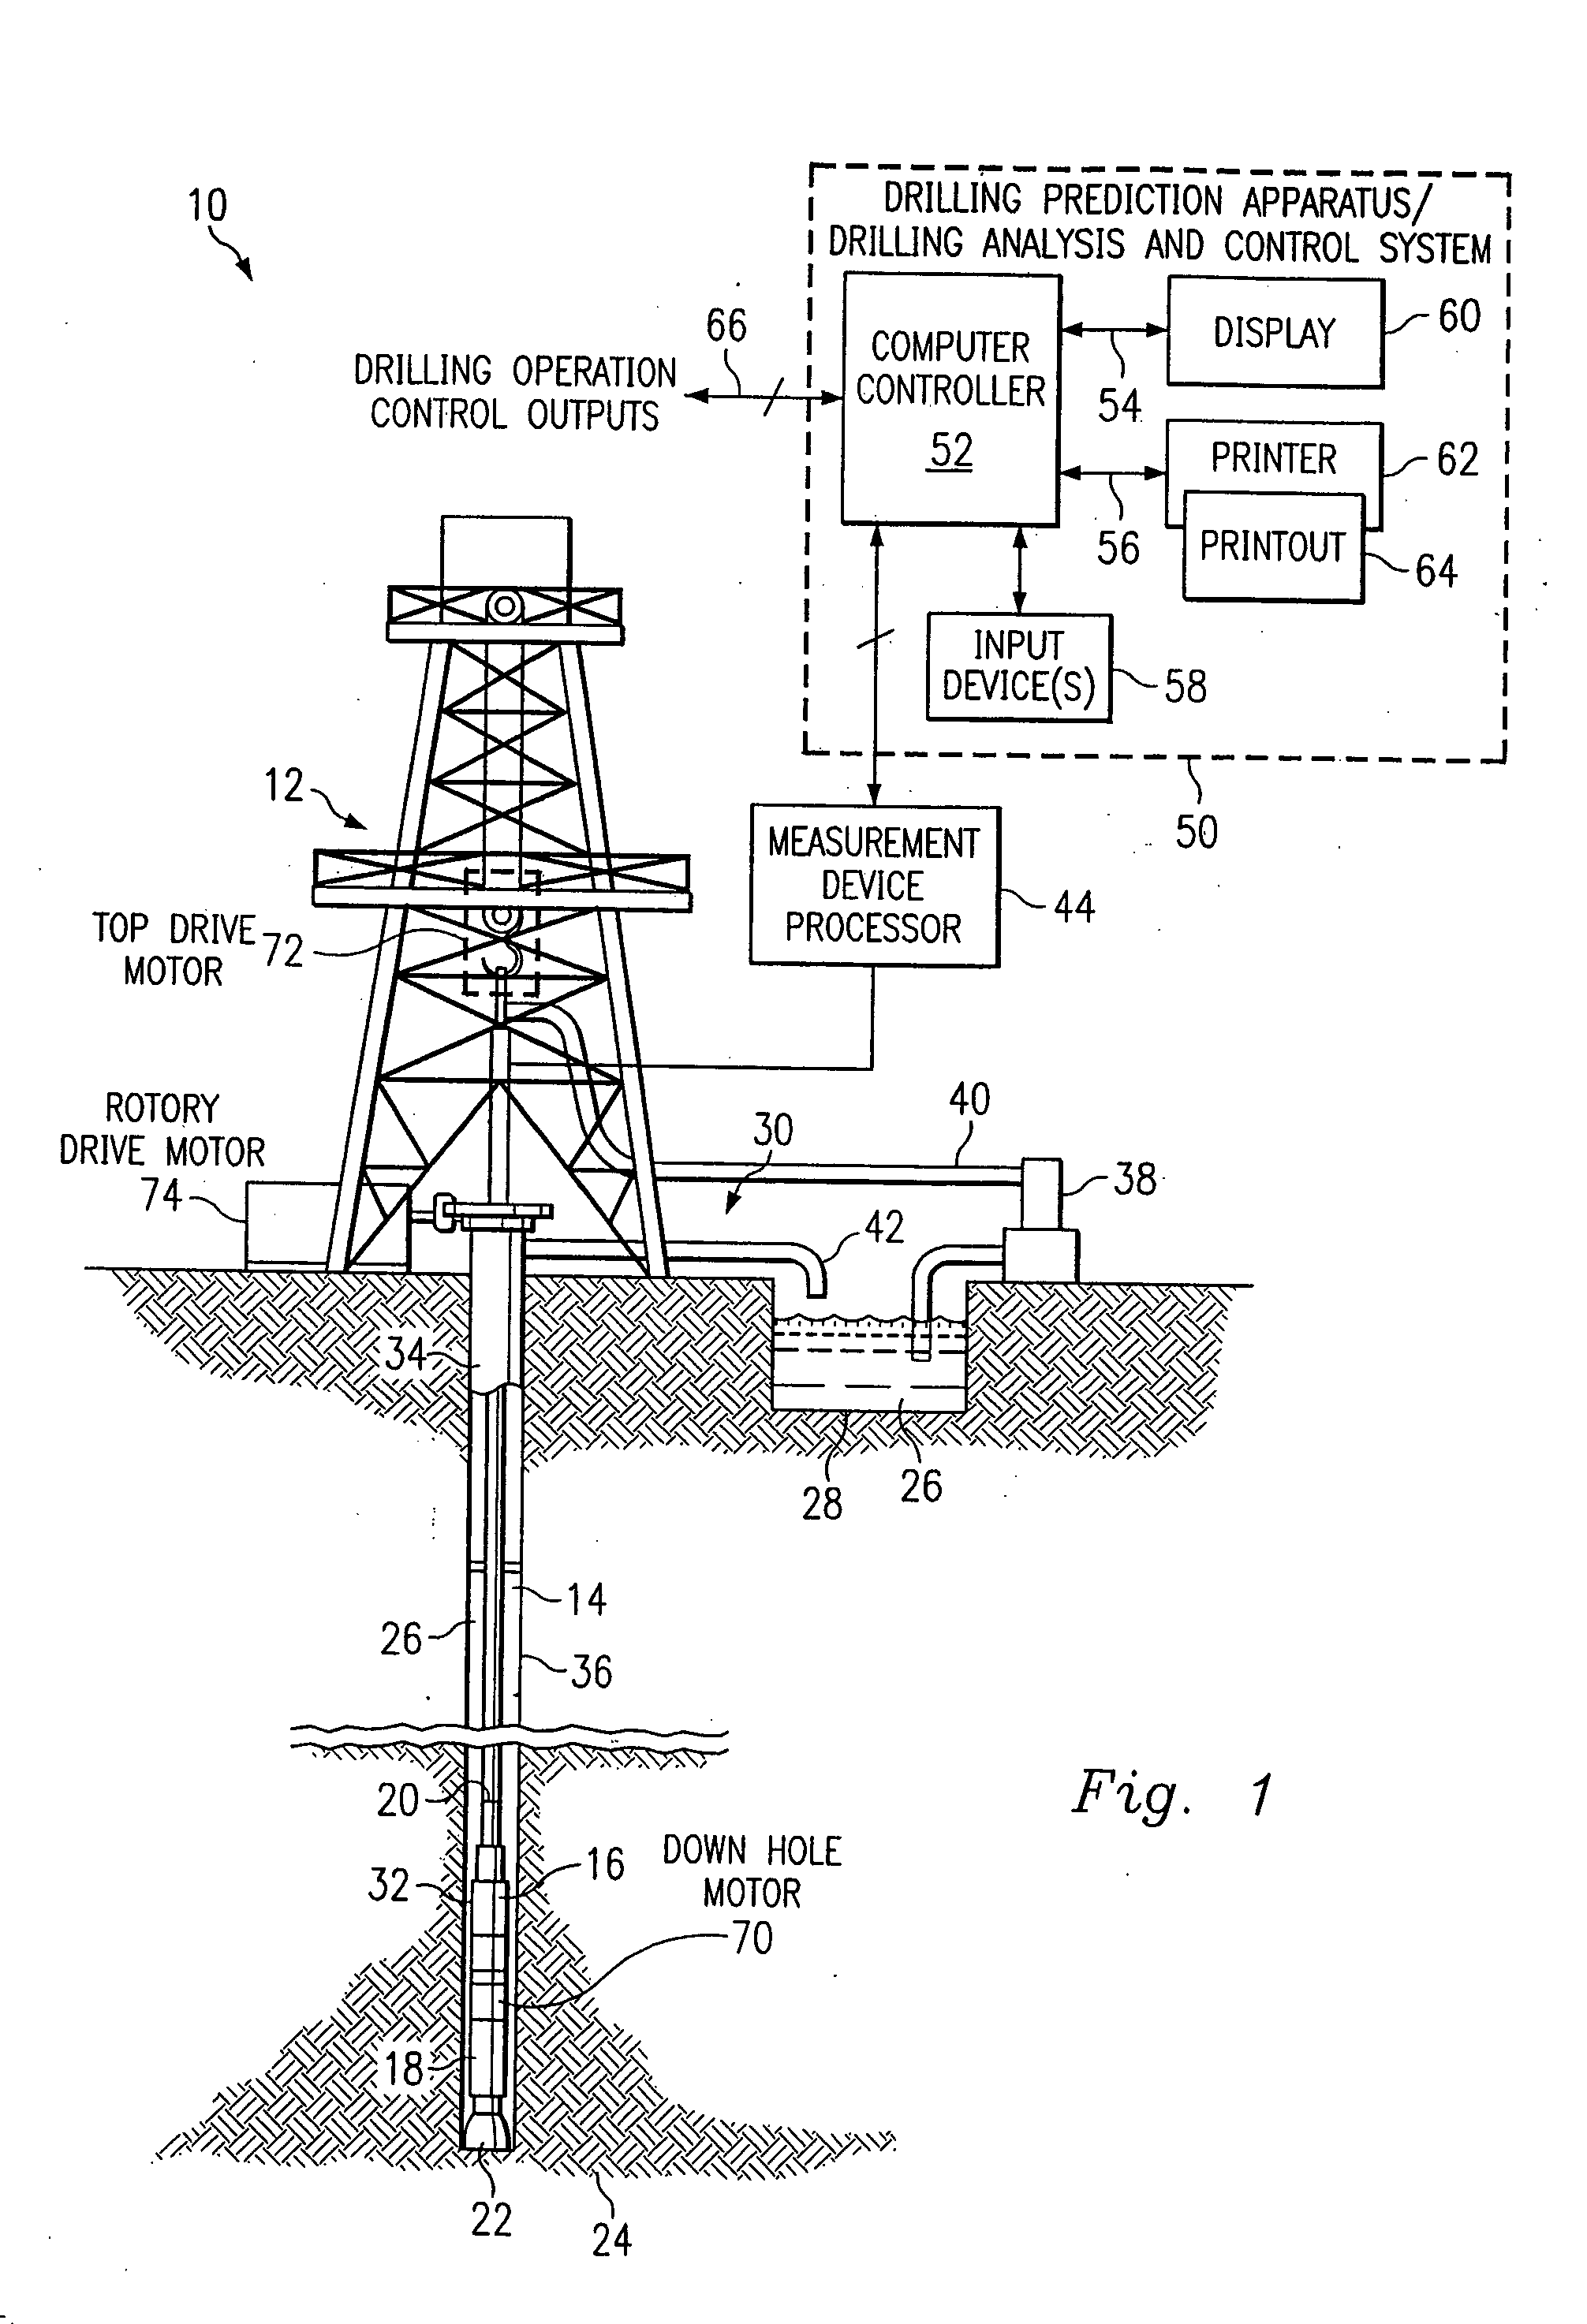 Method and system for predicting performance of a drilling system for a given formation